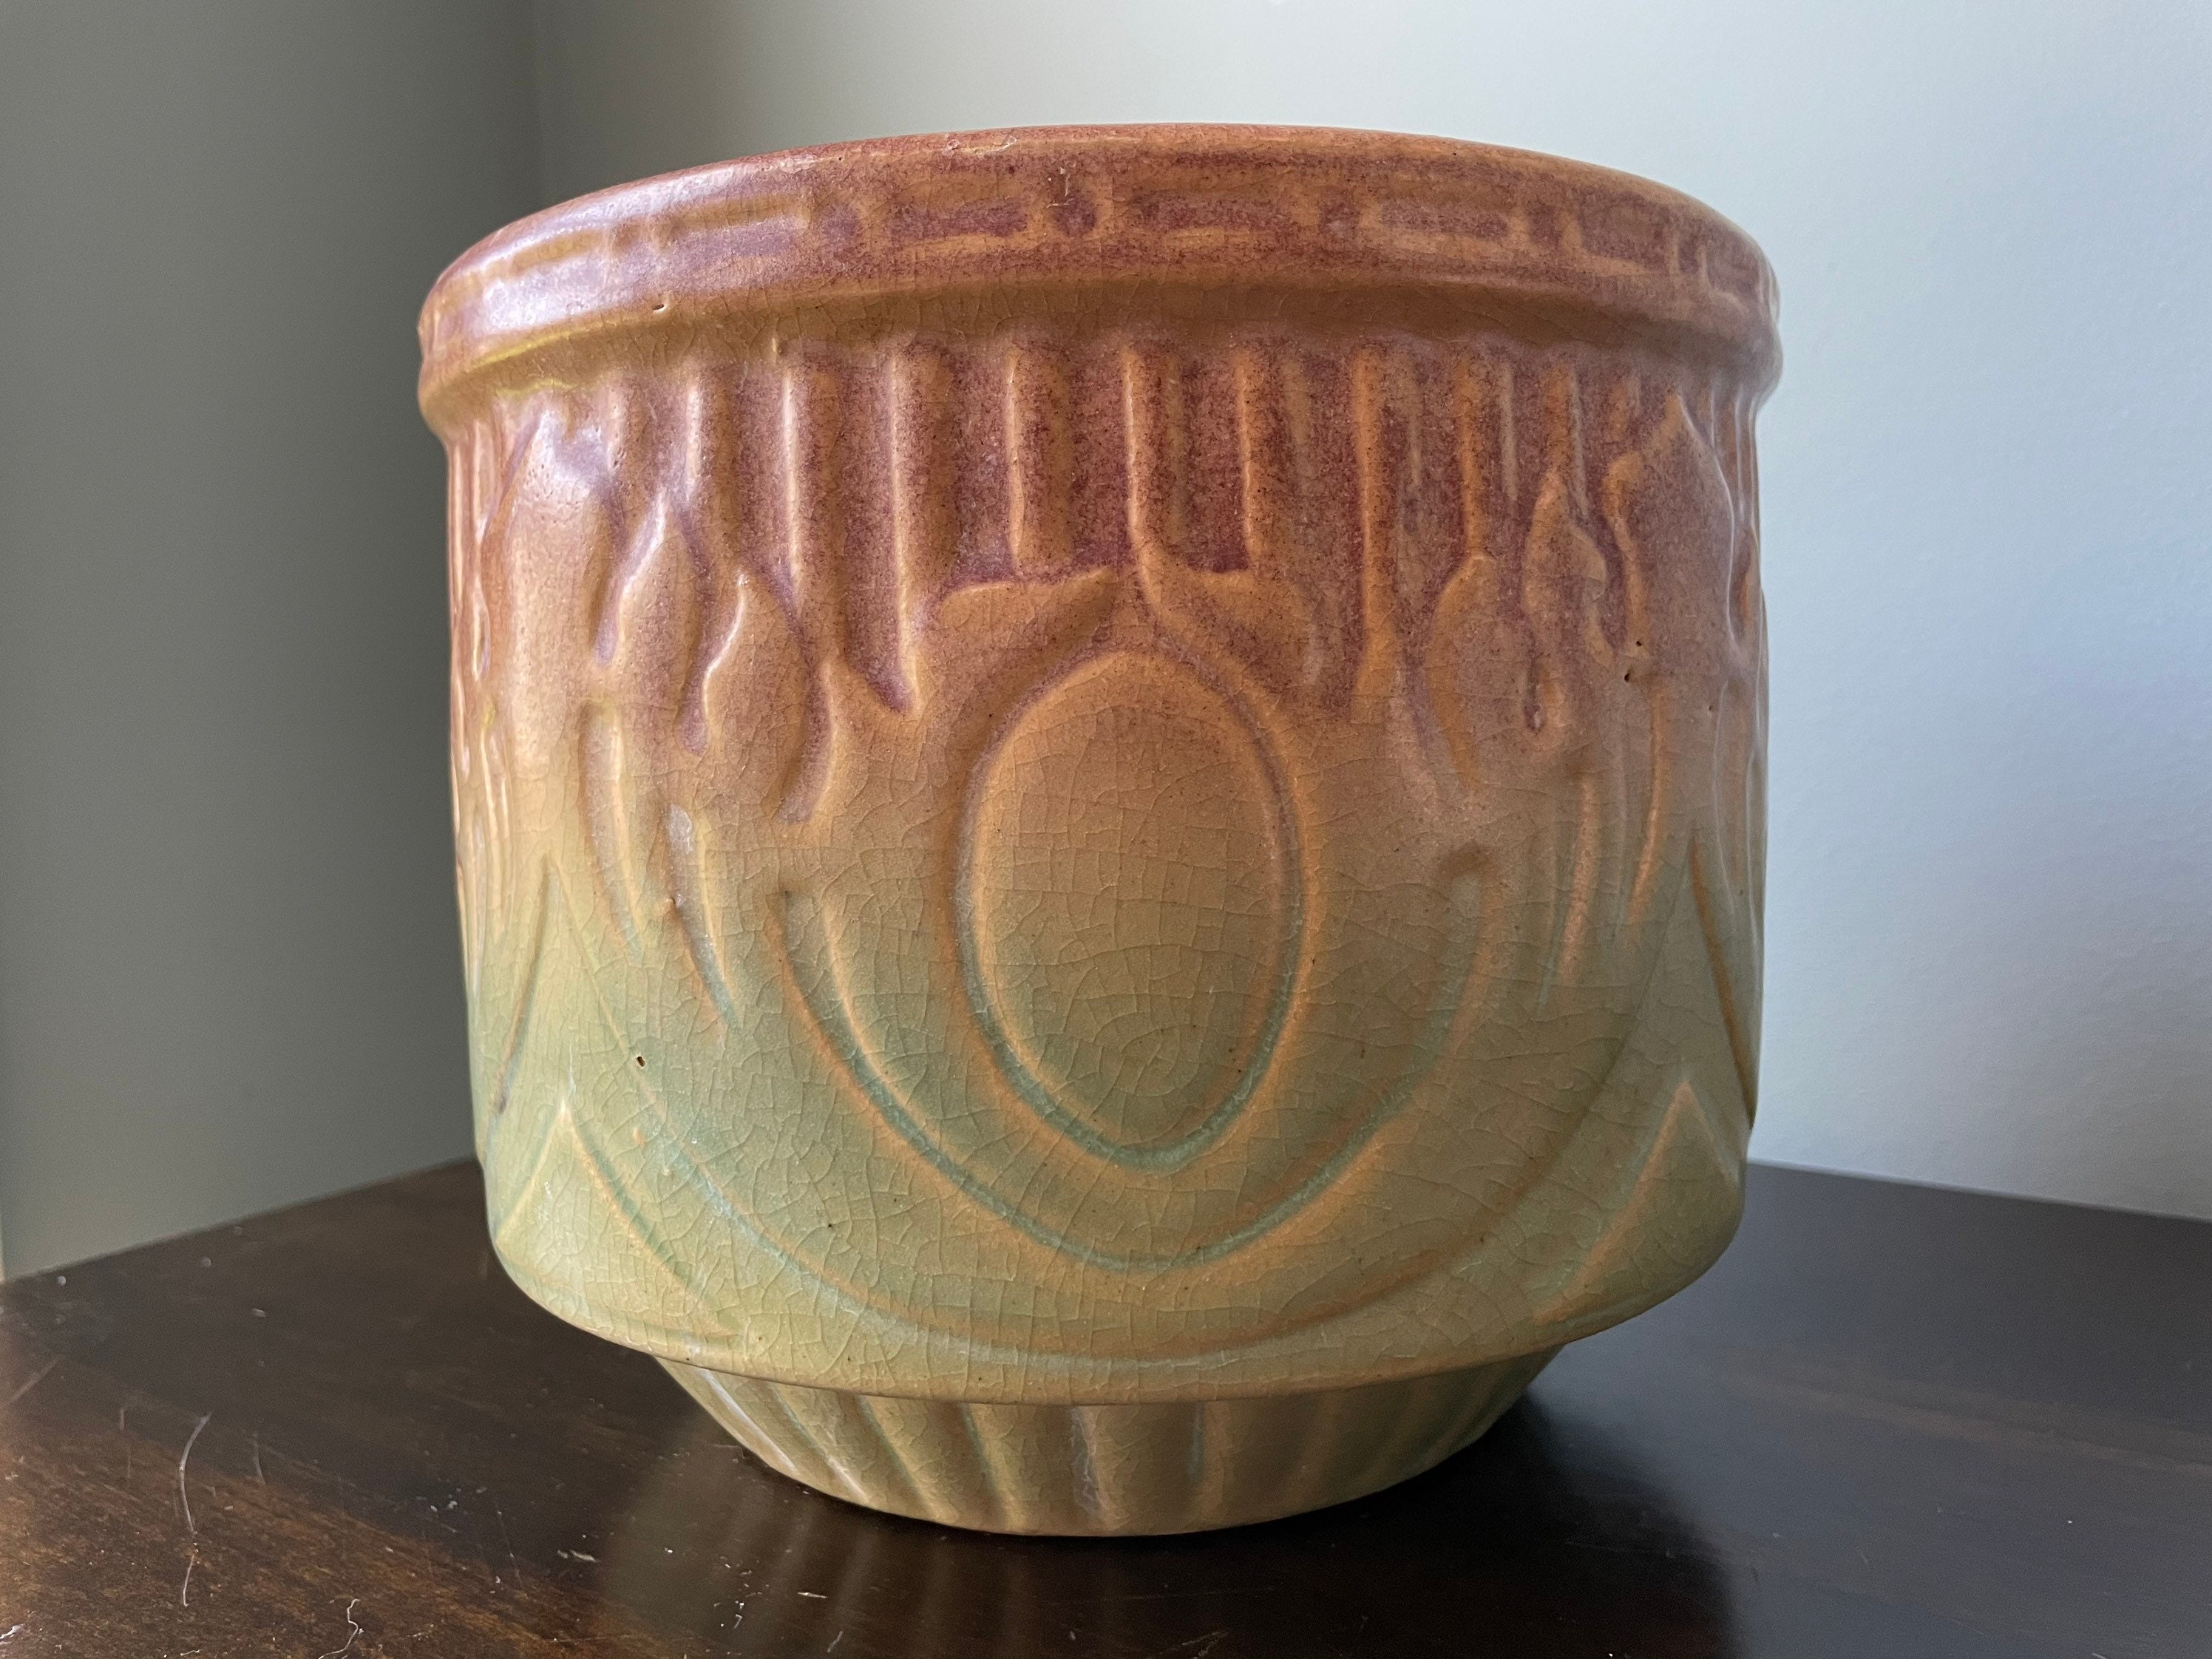 Paint Dipped & Gold Speckled Terra Cotta Pots - Erin Spain